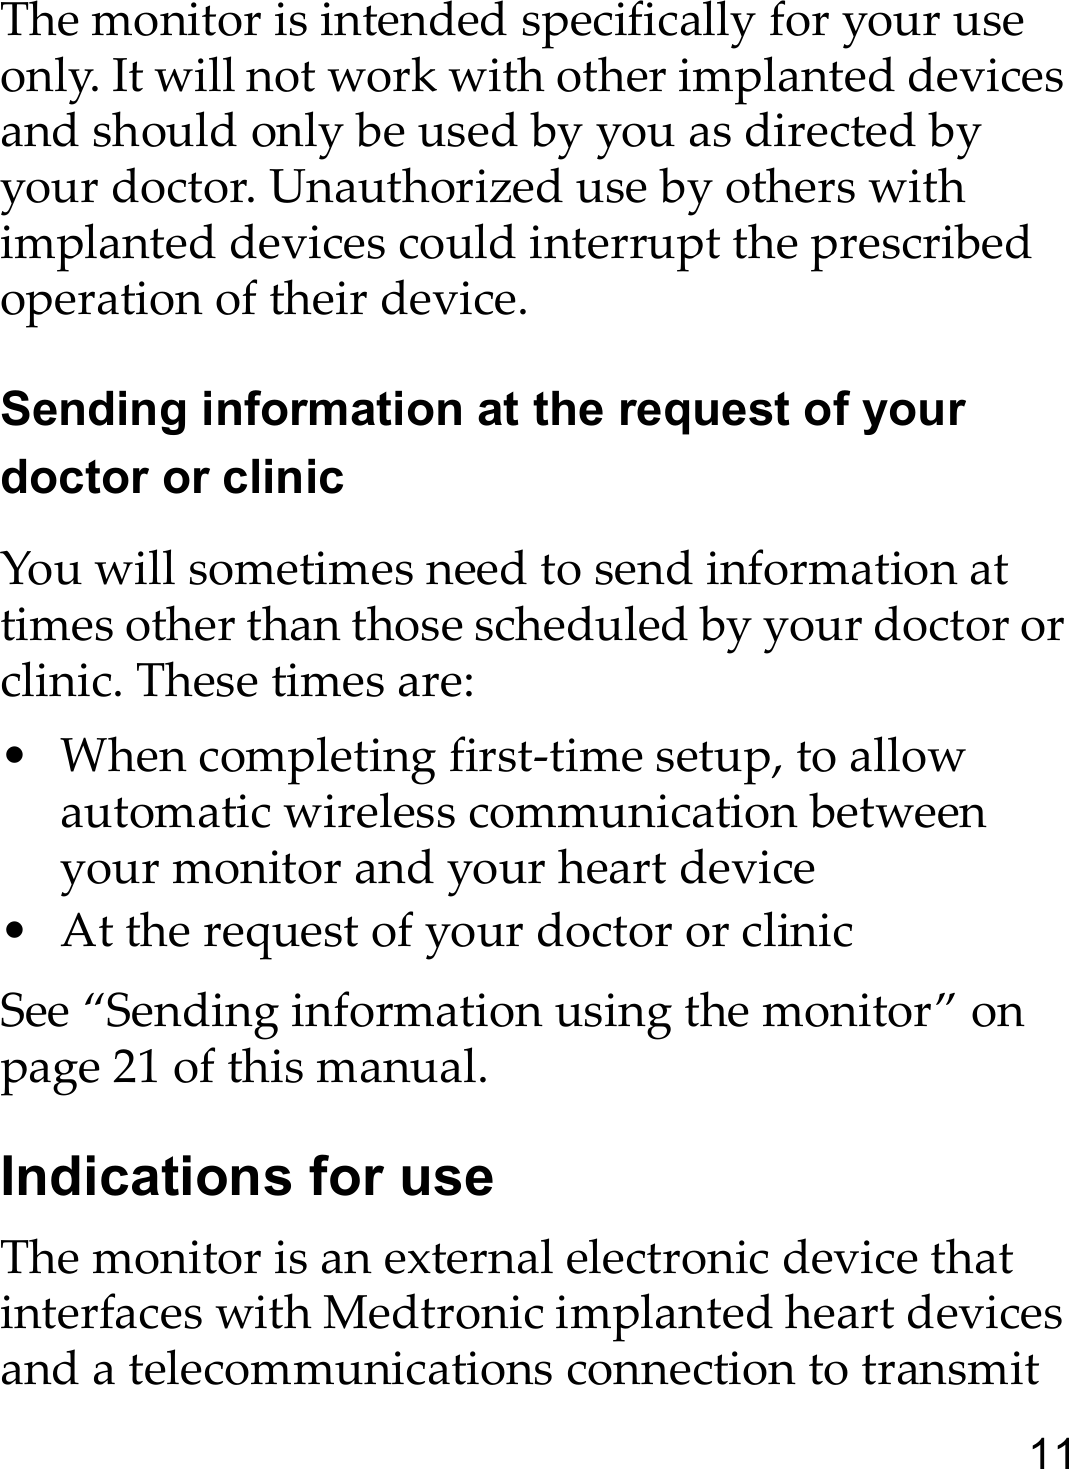 11The monitor is intended specifically for your use only. It will not work with other implanted devices and should only be used by you as directed by your doctor. Unauthorized use by others with implanted devices could interrupt the prescribed operation of their device.Sending information at the request of your doctor or clinicYou will sometimes need to send information at times other than those scheduled by your doctor or clinic. These times are:• When completing first-time setup, to allow automatic wireless communication between your monitor and your heart device • At the request of your doctor or clinicSee “Sending information using the monitor” on page 21 of this manual.Indications for useThe monitor is an external electronic device that interfaces with Medtronic implanted heart devices and a telecommunications connection to transmit 